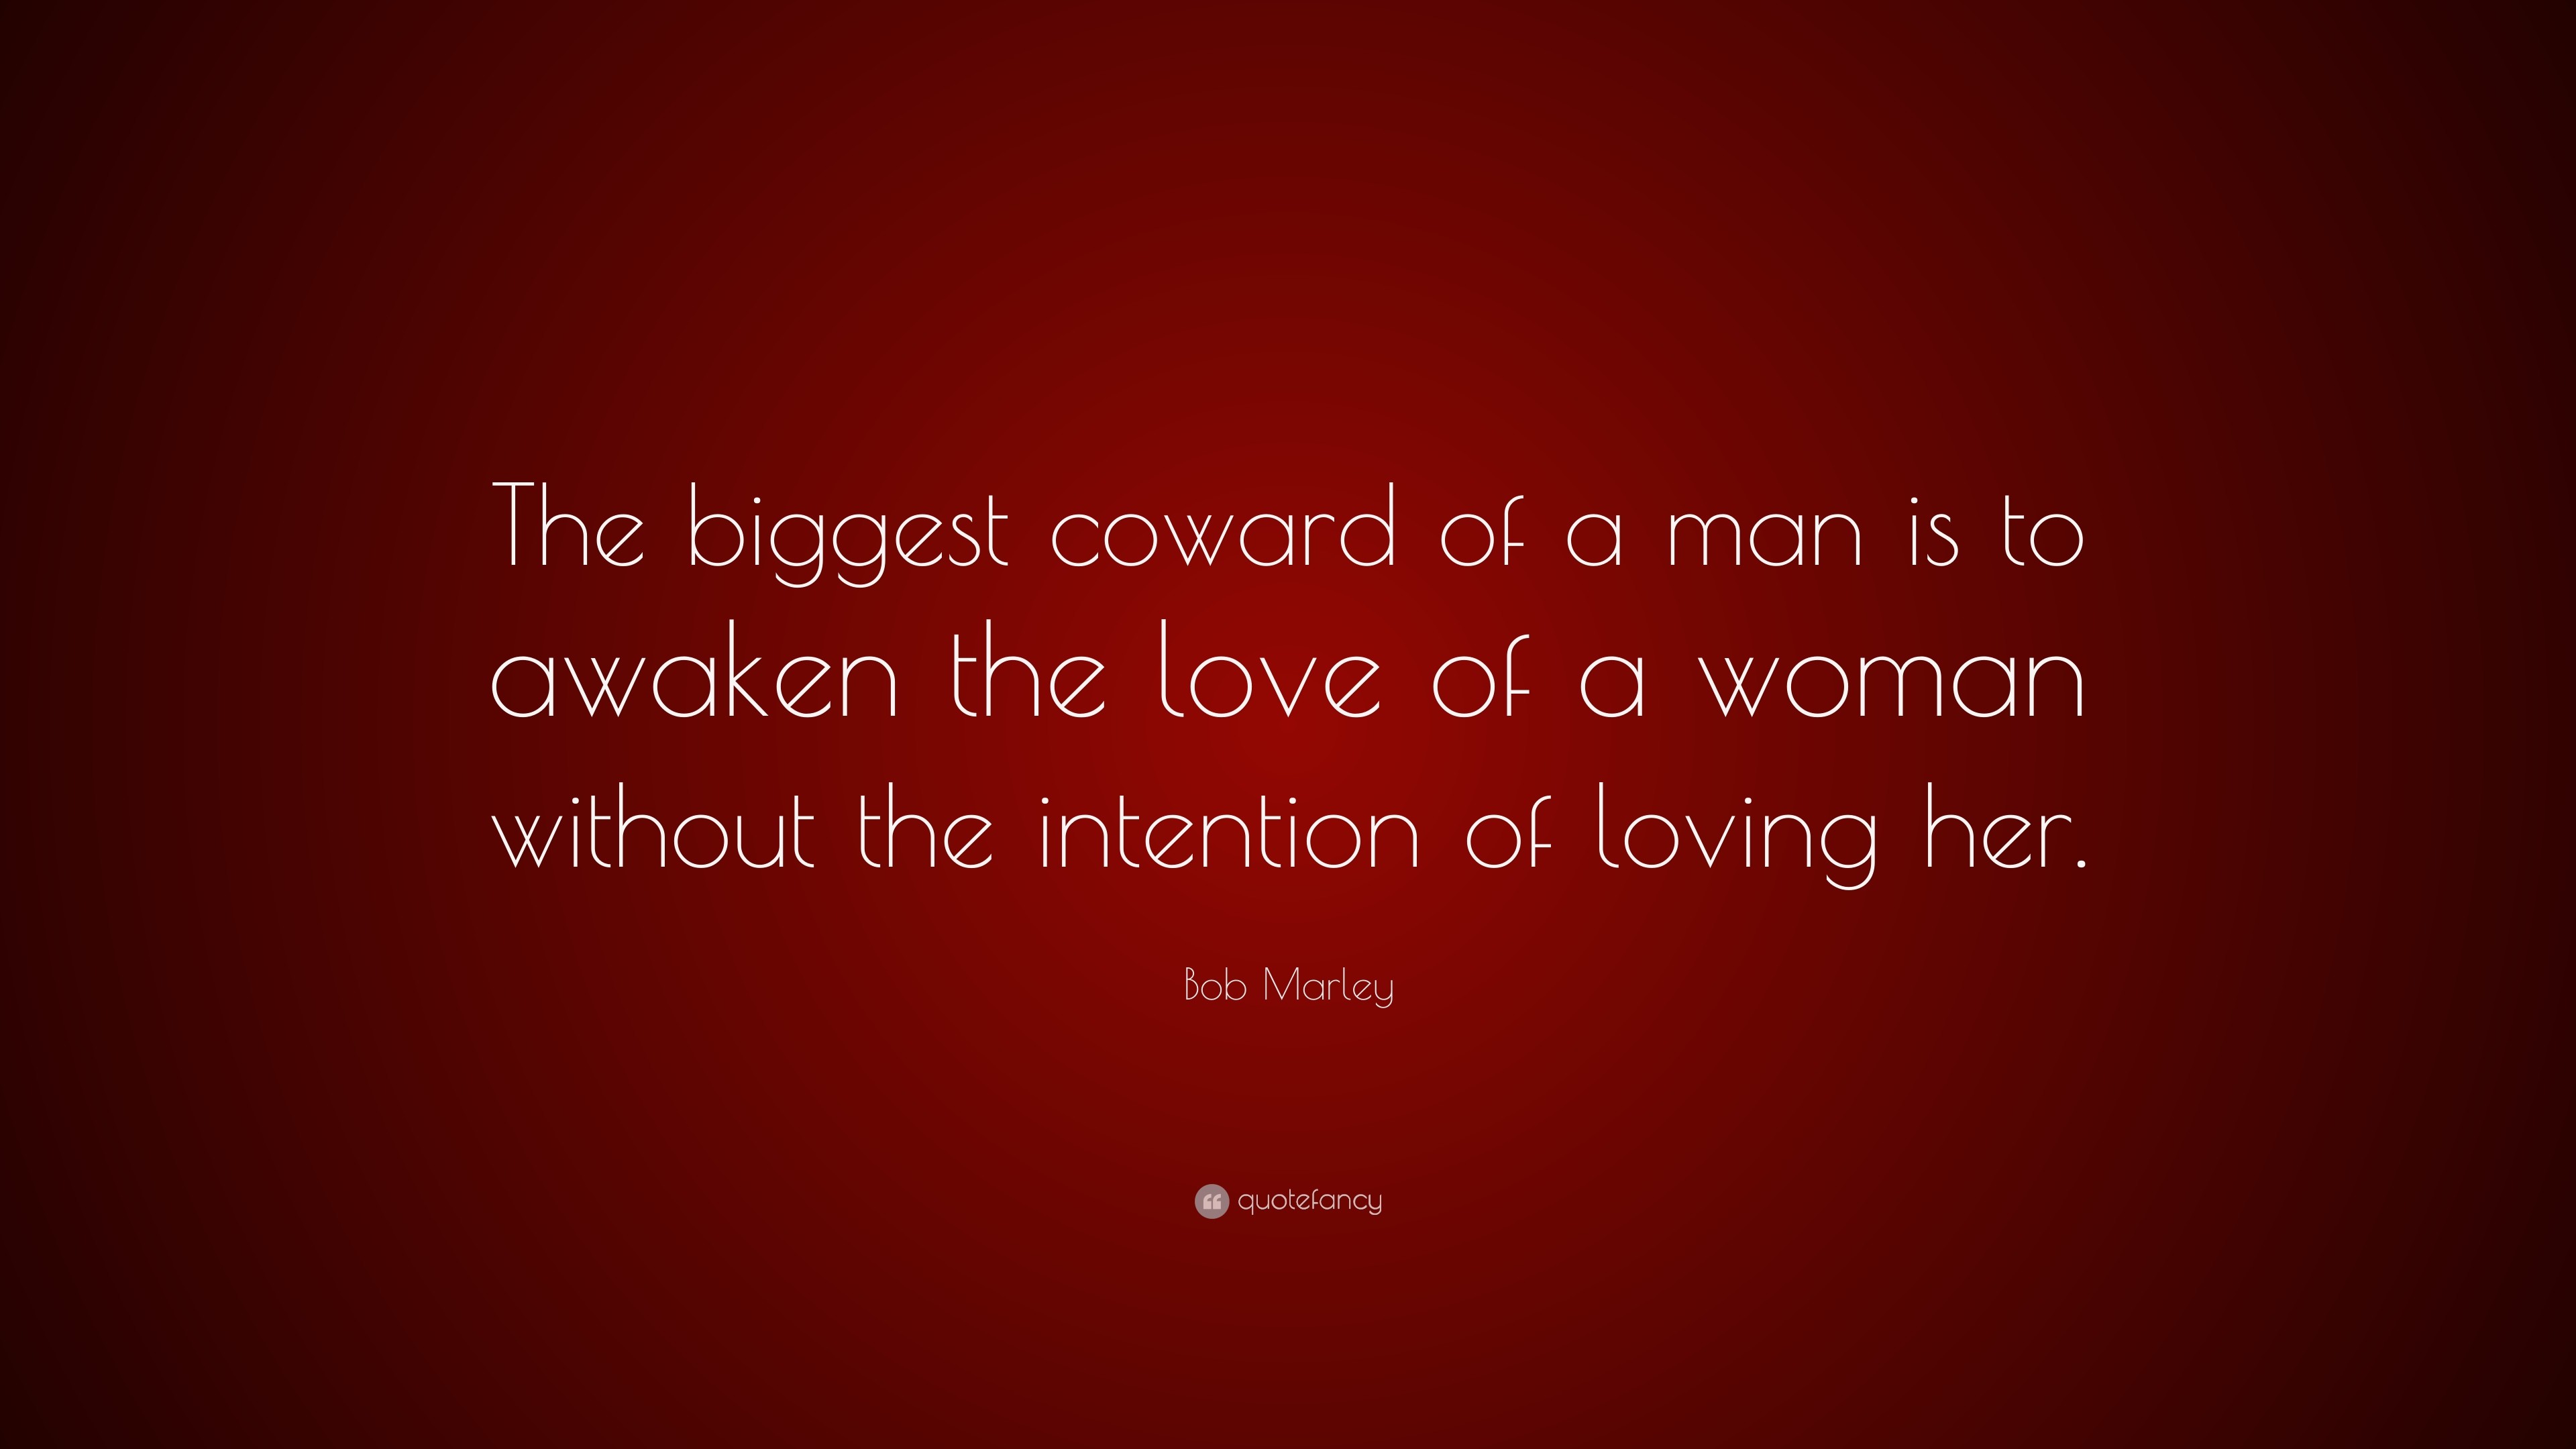 3840x2160 Bob Marley Quote: “The biggest coward of a man is to awaken the love